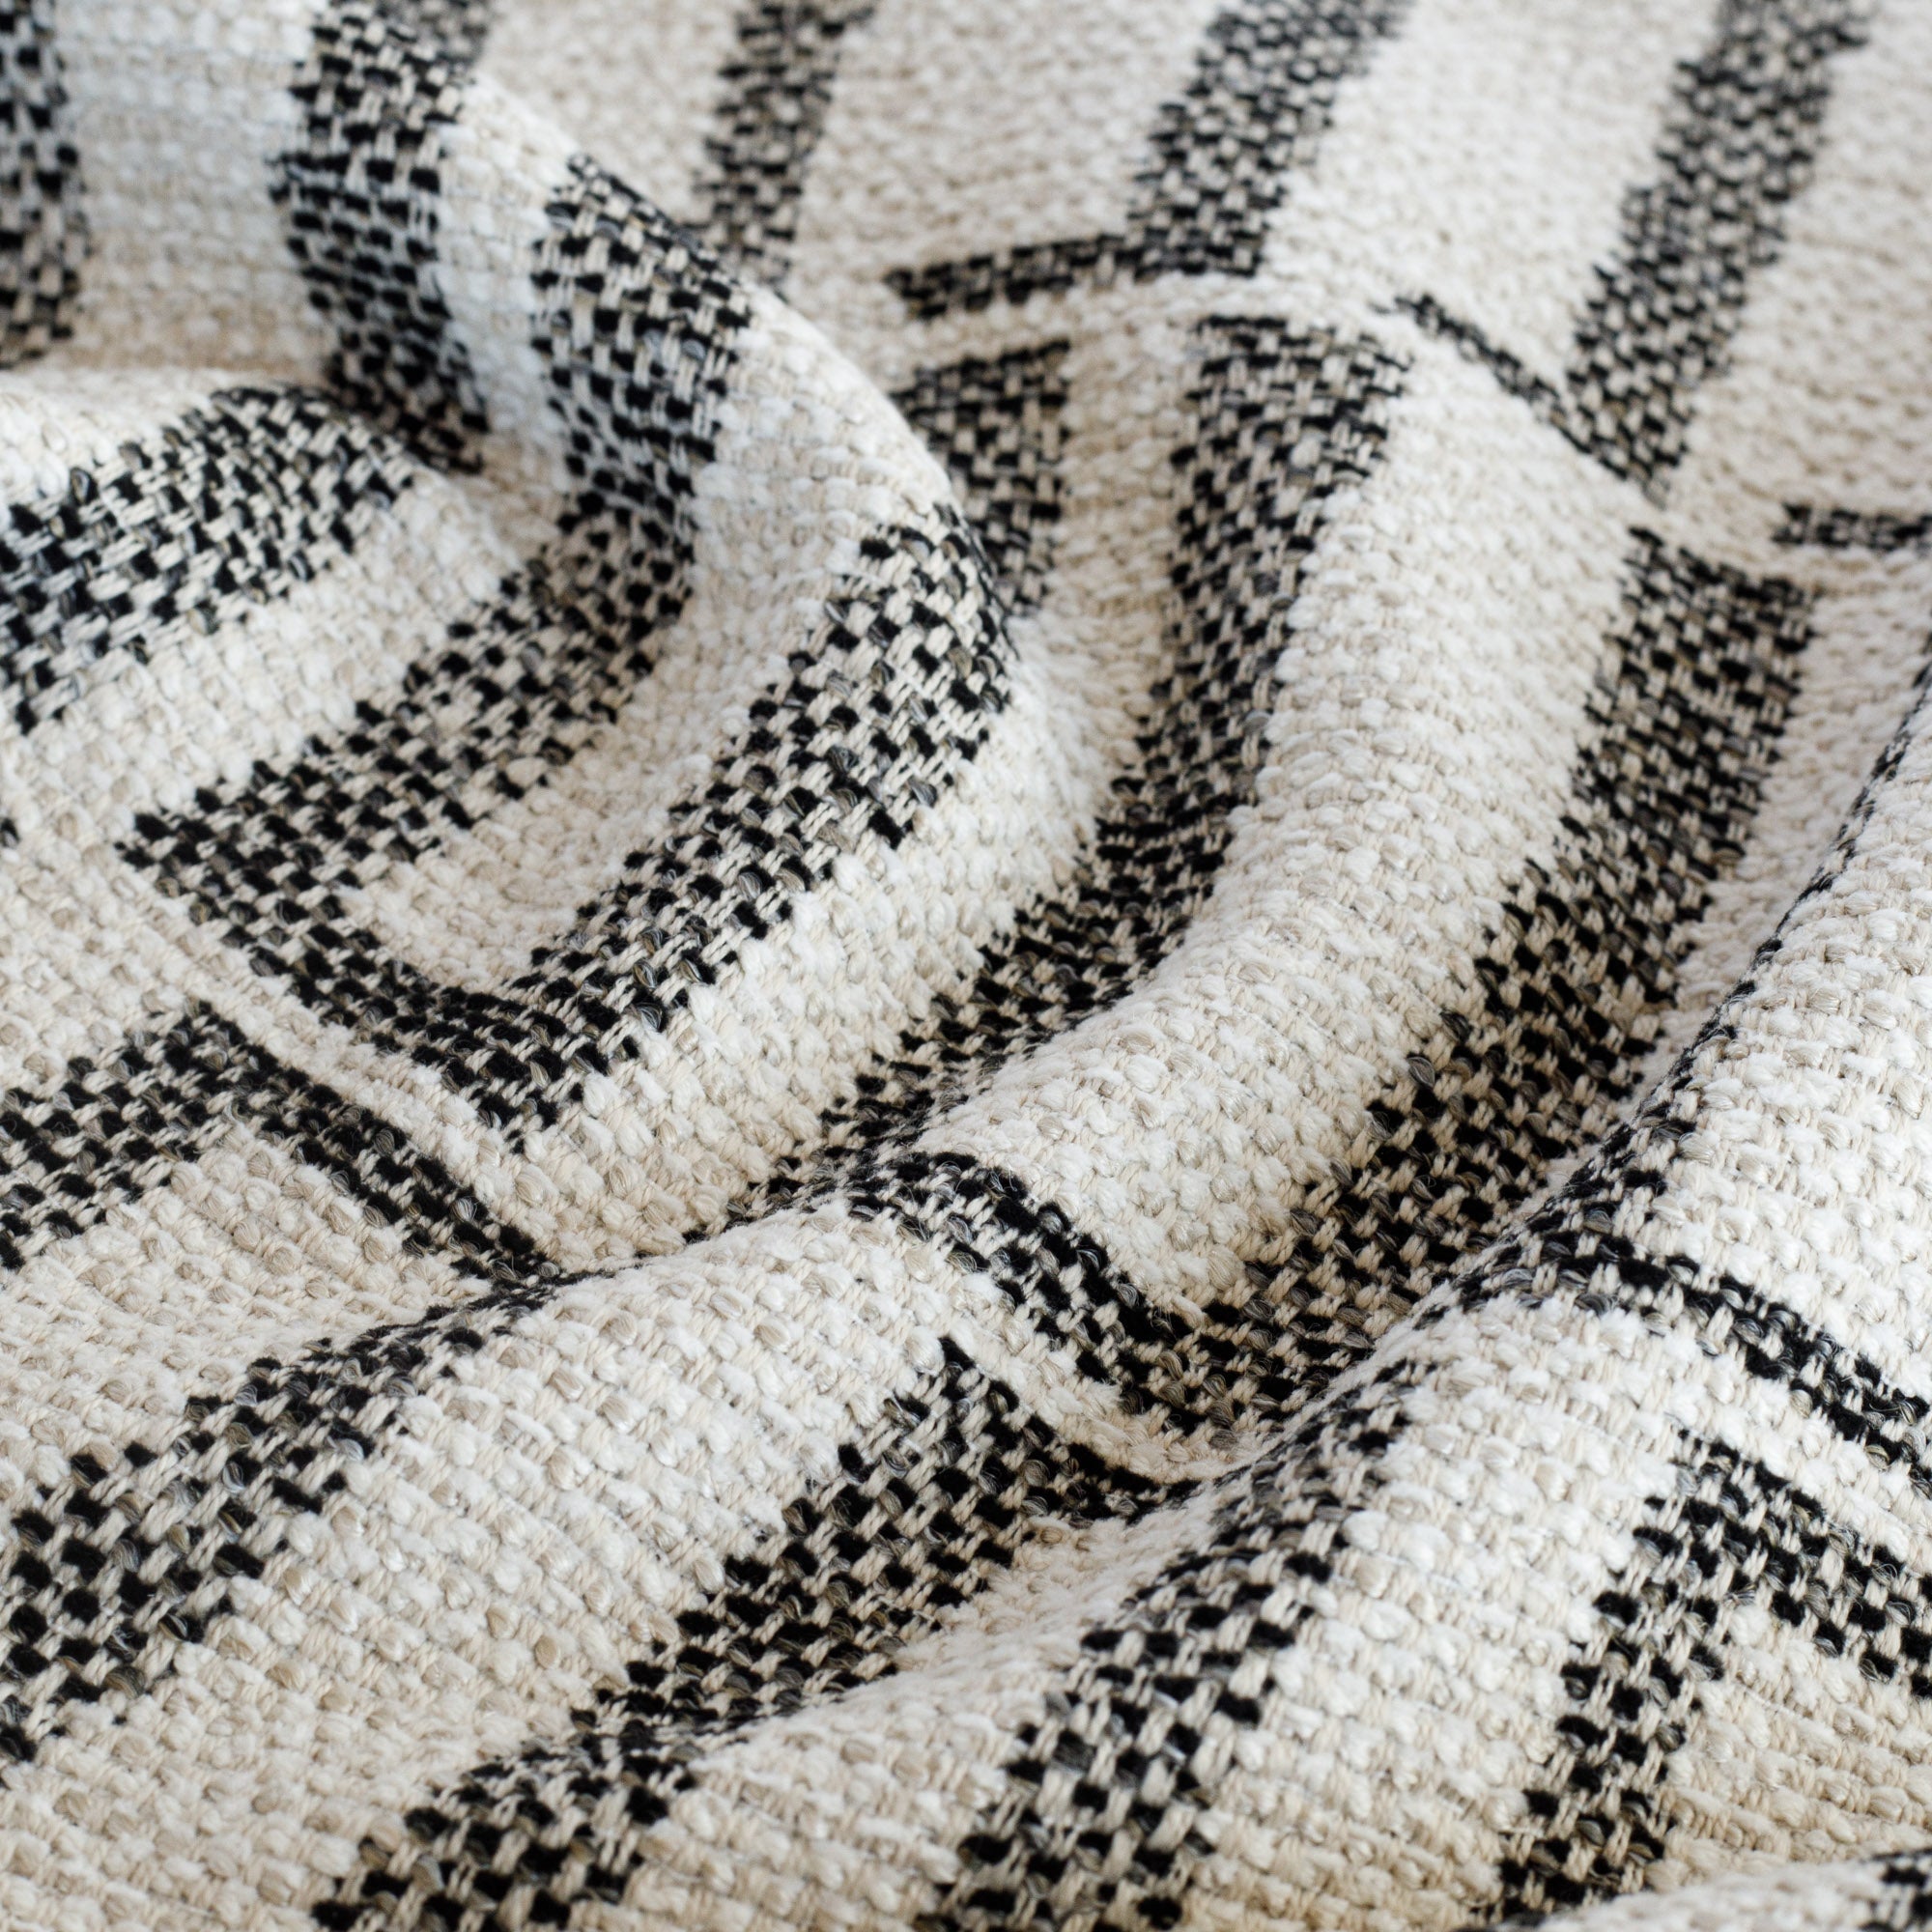 a black and sand beige geometric patterned outdoor fabric : close up view